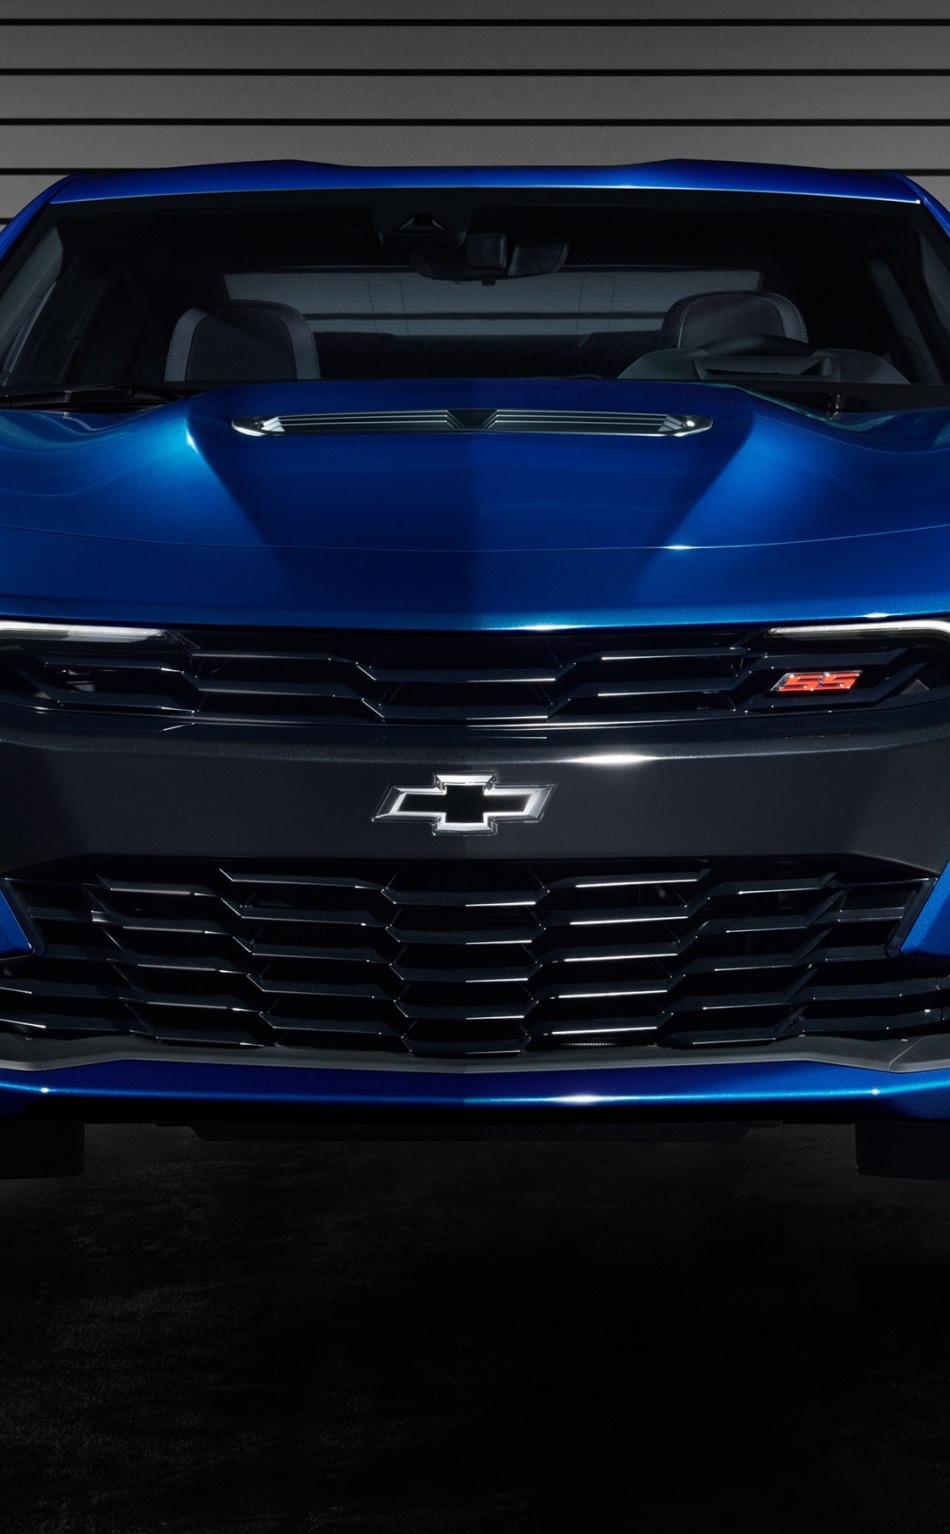 Download wallpaper 950x1534 blue chevrolet camaro ss, front, 2019, iphone,  950x1534 hd background, 6460